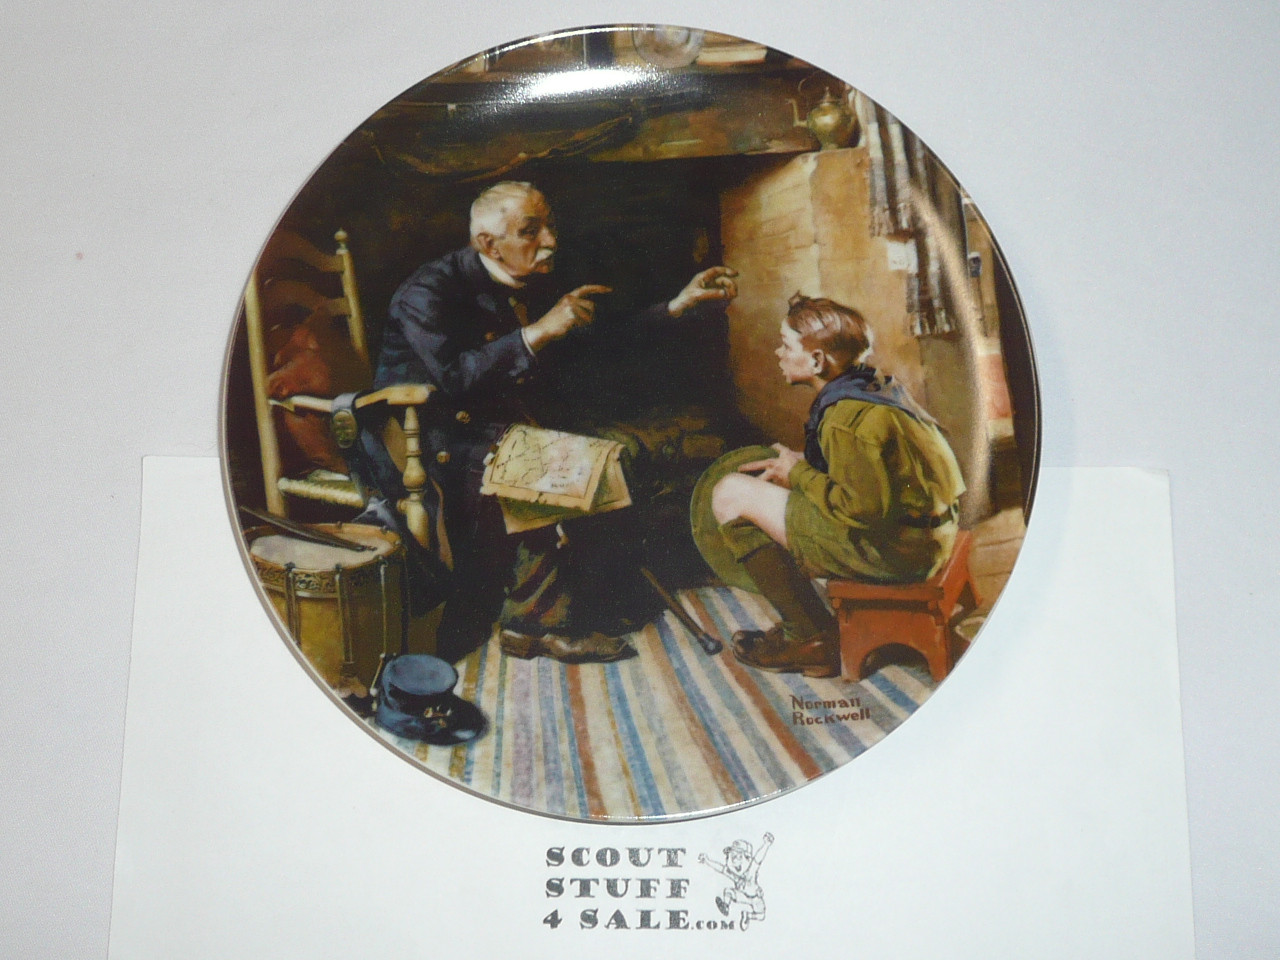 Knowles Norman Rockwell "The Veteran" 1988, 8.5" Decorative China Plate